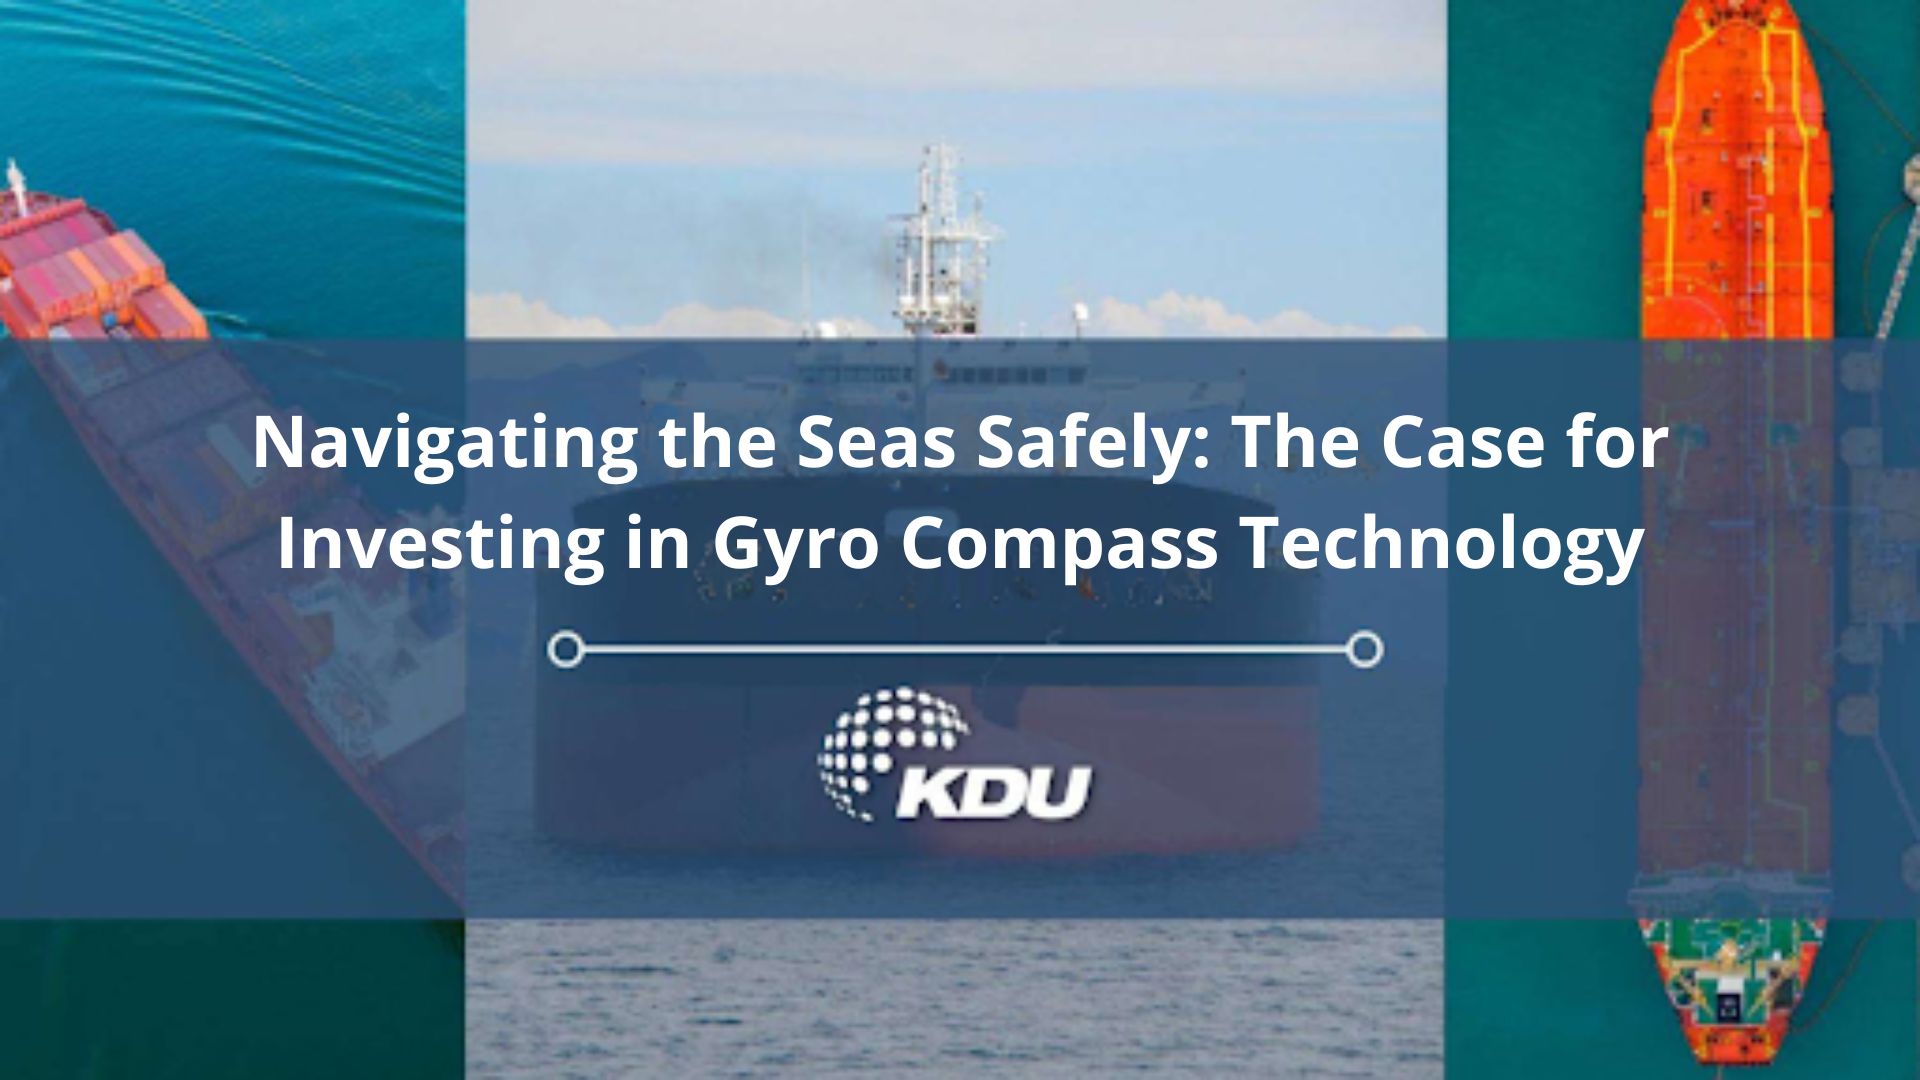 Navigating the Seas Safely: The Case for Investing in Gyro Compass Technology